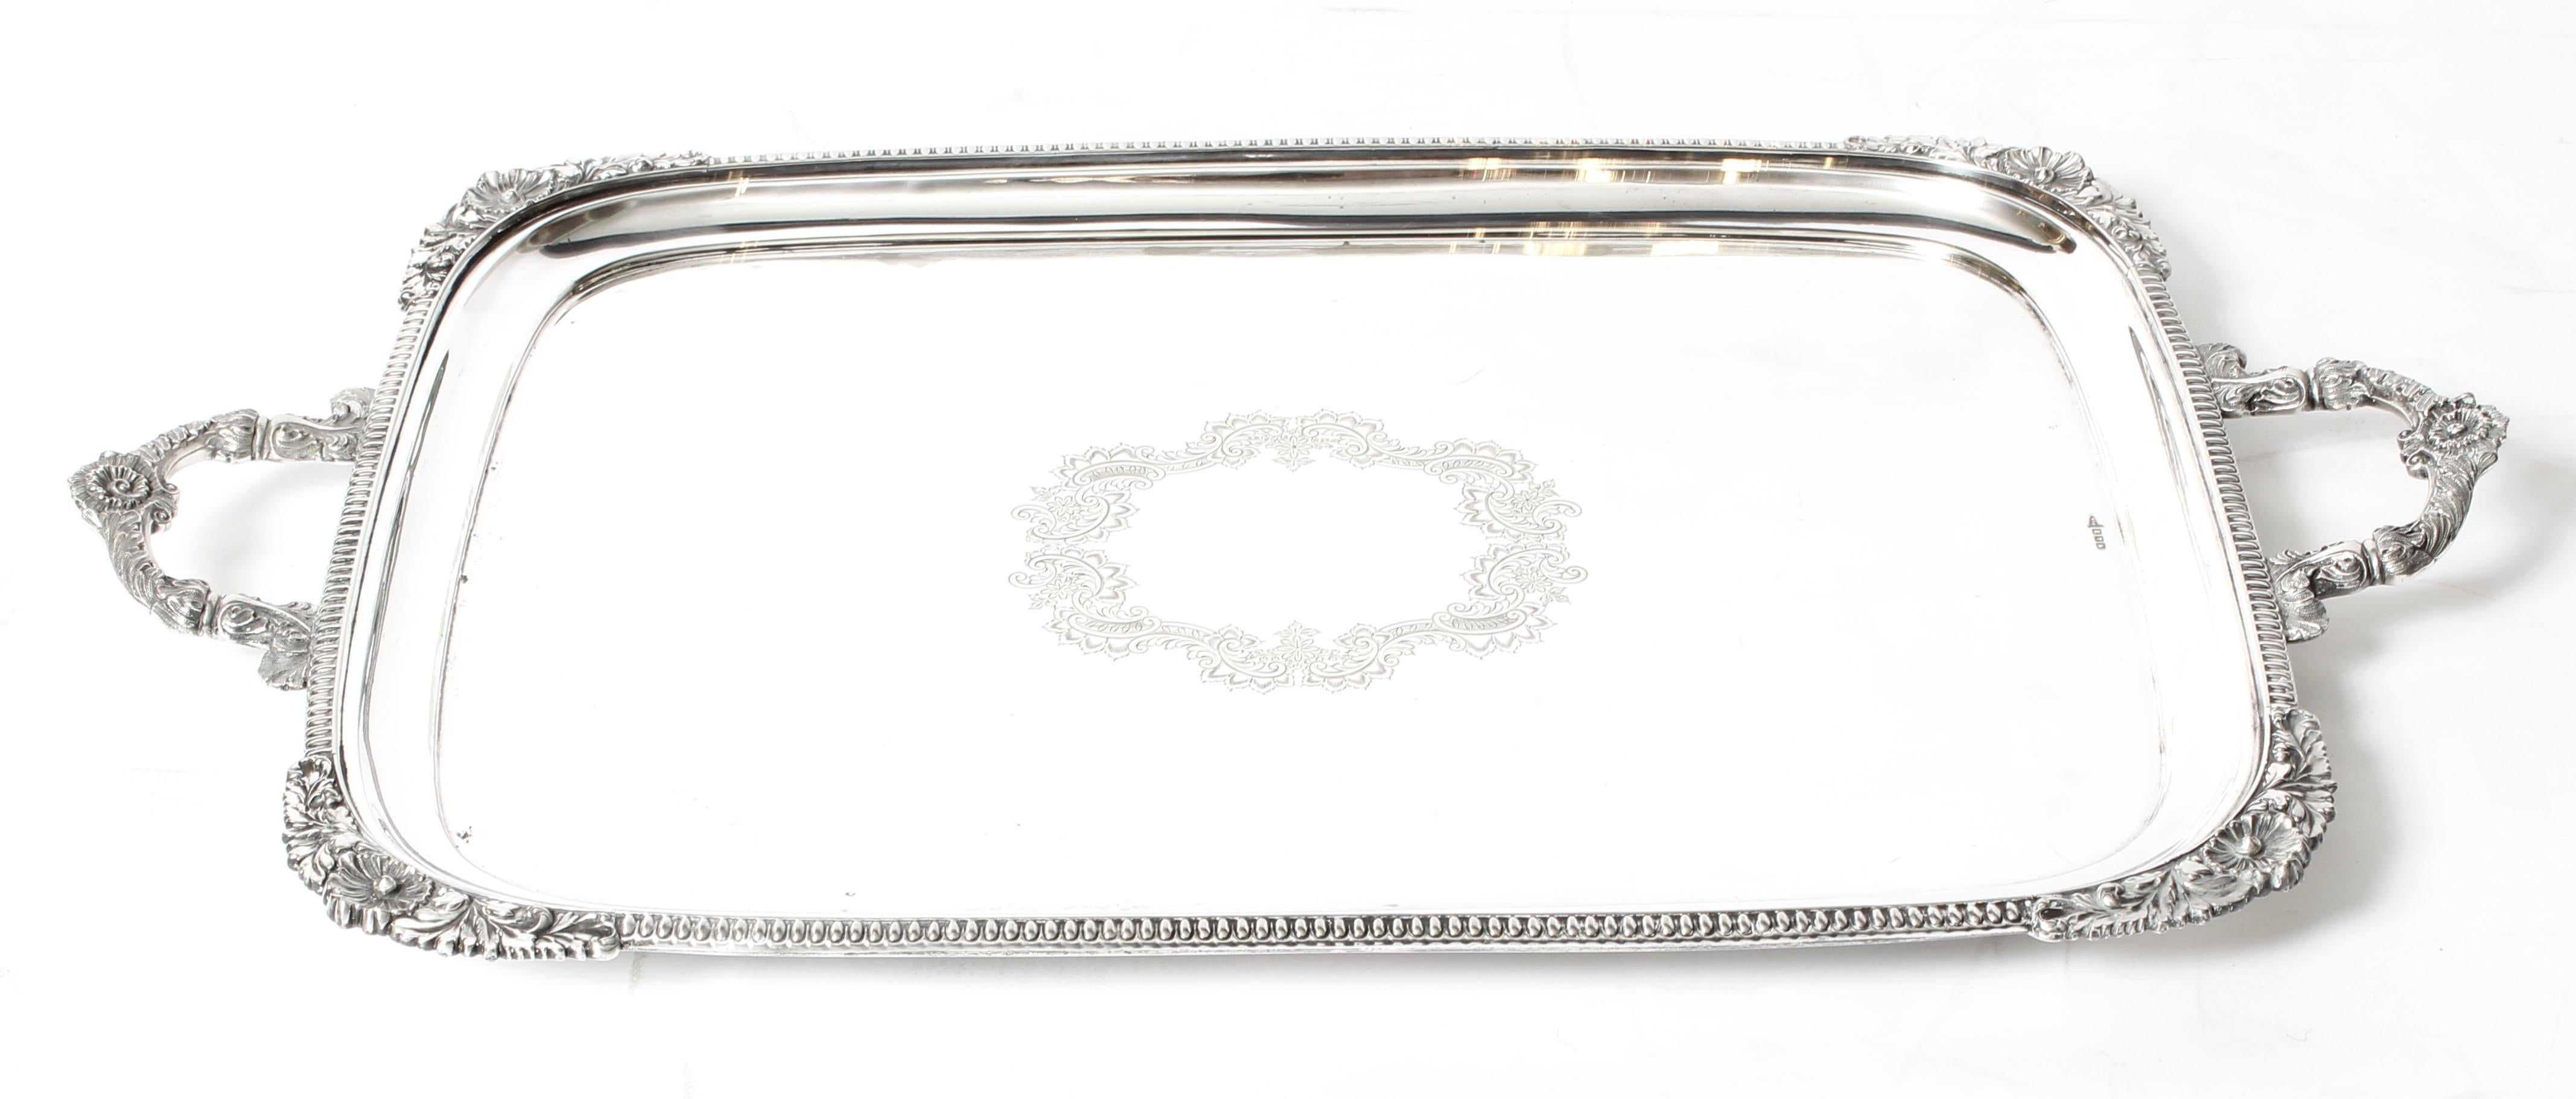 This is a lovely antique large English Edwardian silver plated tray with makers marks of Walker & Hall, Sheffield, dating it to circa 1910.

This large rectangular silver plated tray features fabulous engraved decoration, a deep set decorative